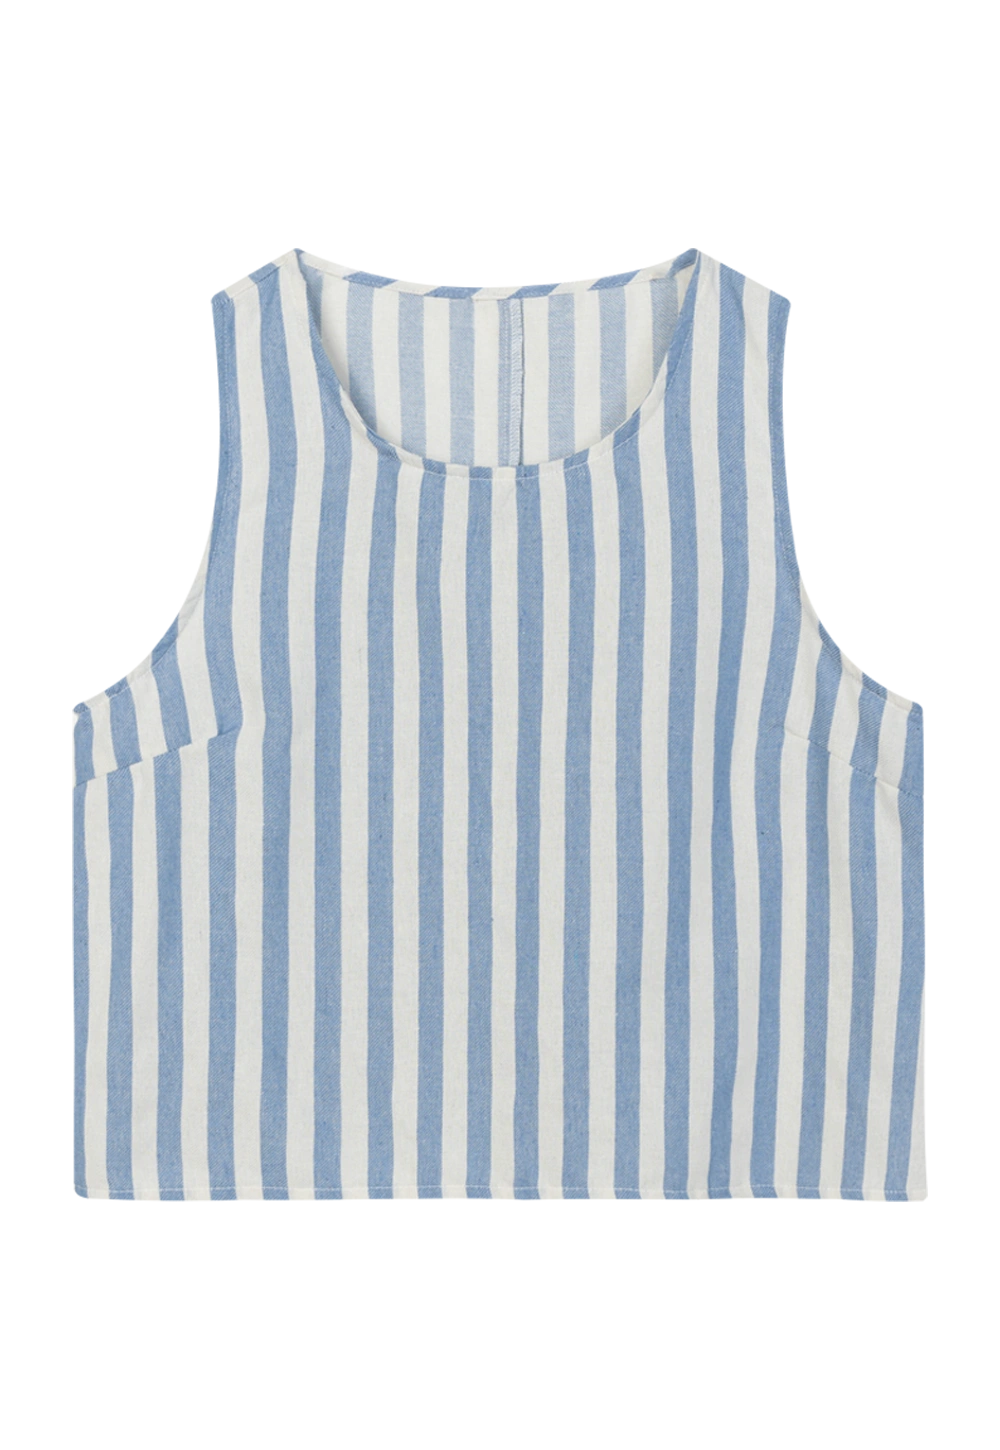 Women's Red and White Striped Sleeveless Top - Crew Neck, Cotton Blend